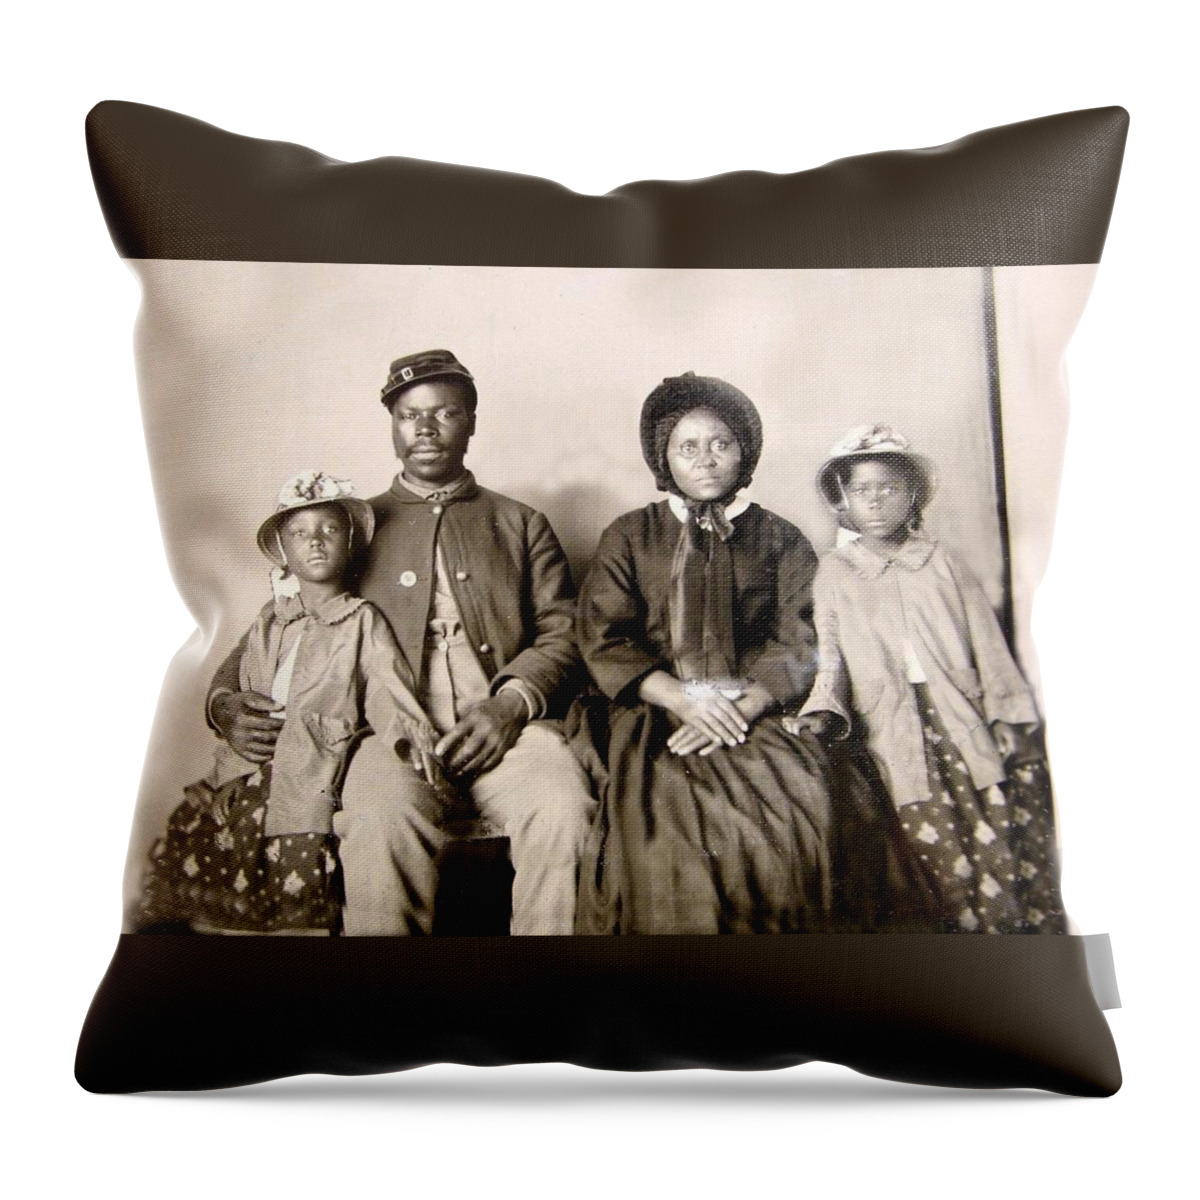 Black Americana Throw Pillow featuring the photograph African American Union Soldier Family, 1864 by Kim Kent